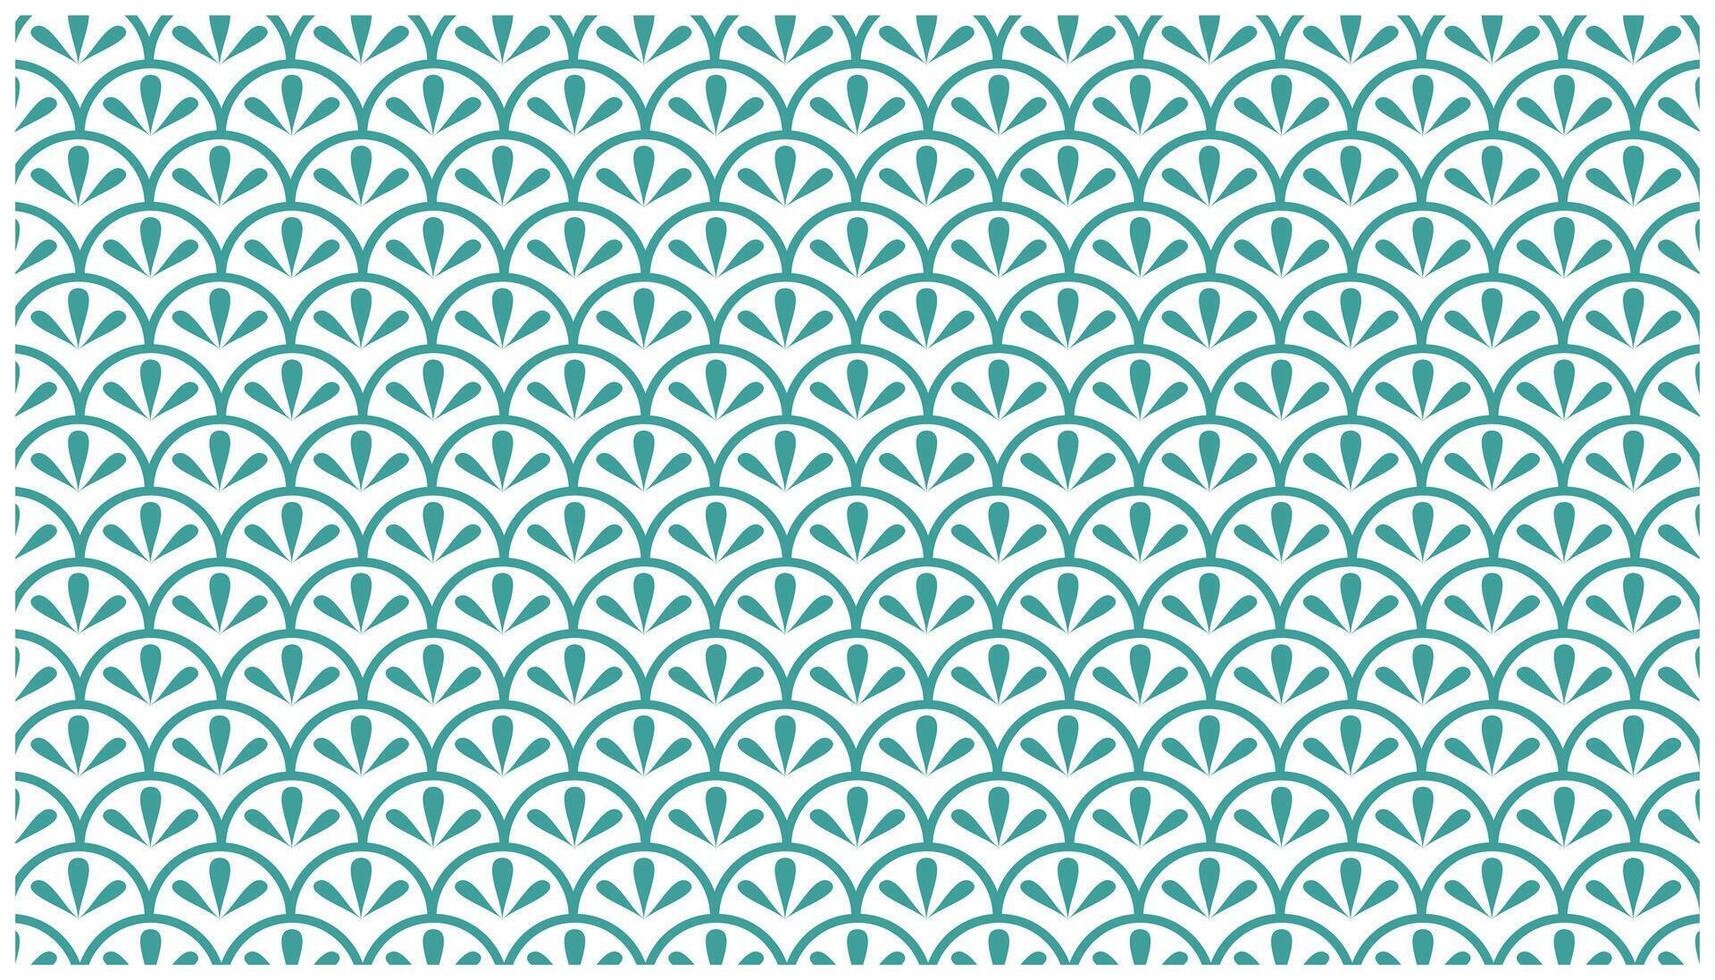 Vector pattern. Background texture in geometric ornamental style. Perfect for fashion, textile design, cute themed fabric, on wall paper, wrapping paper, fabrics and home